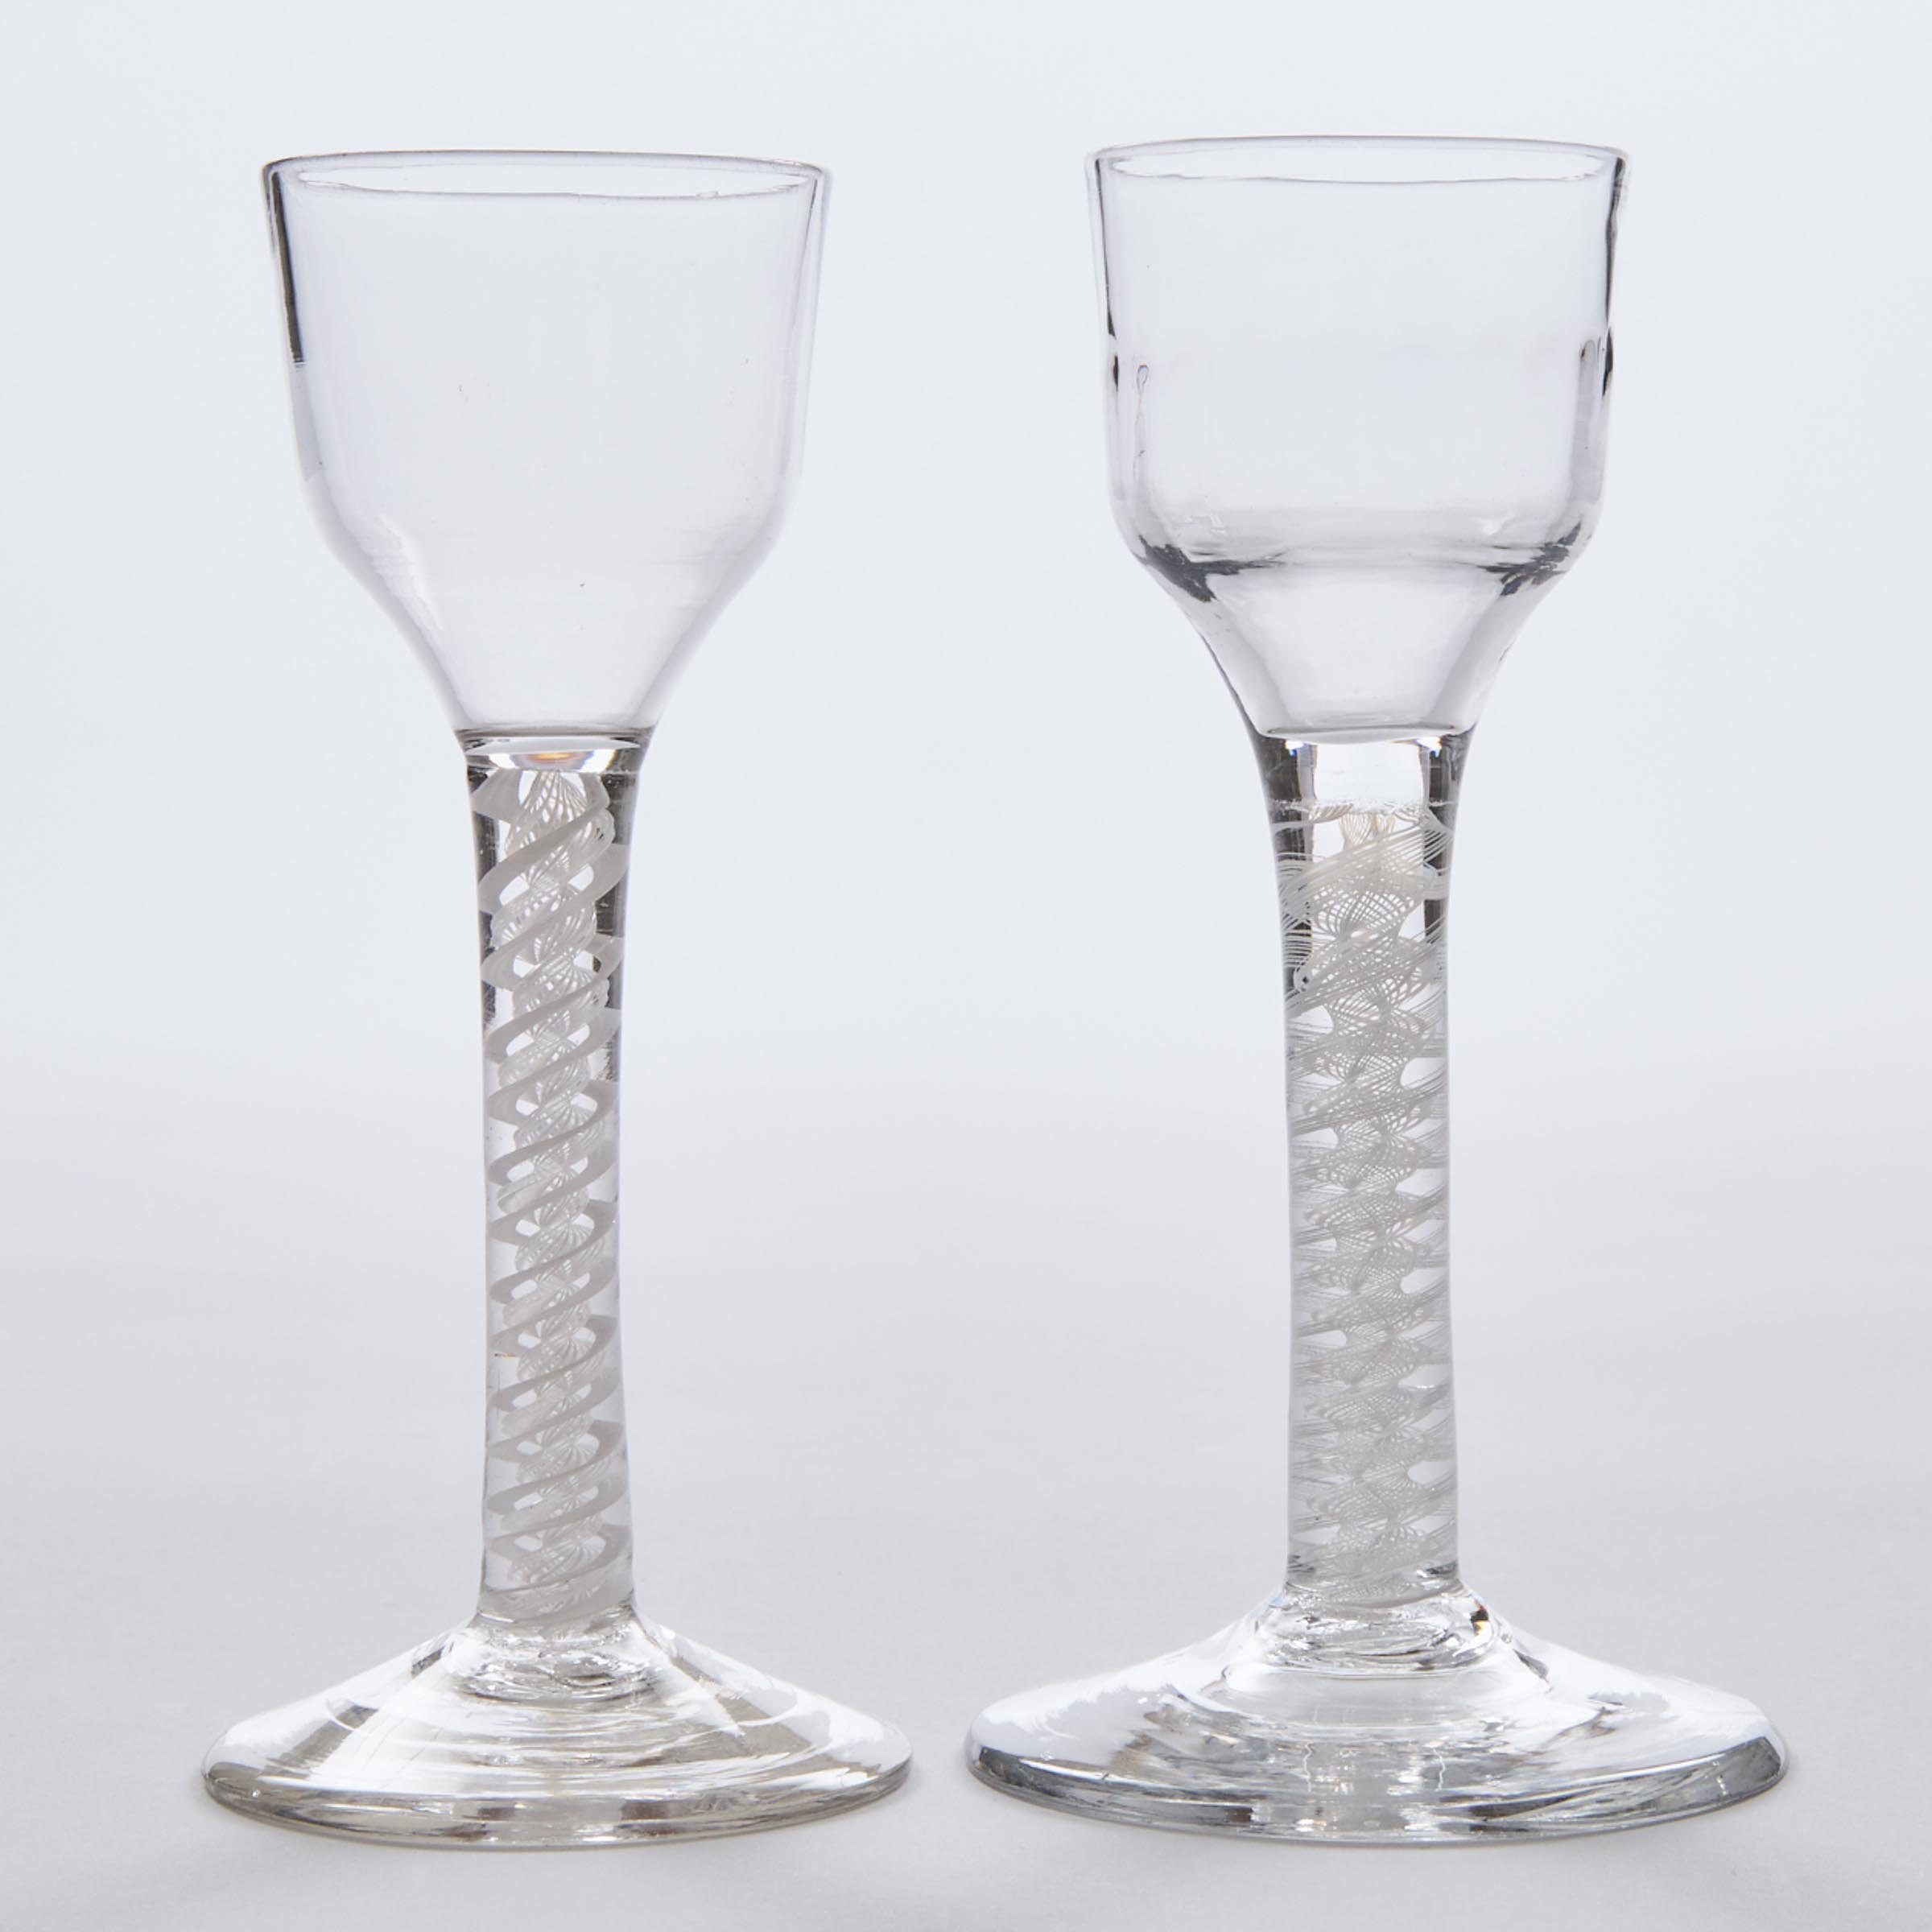 Two English Opaque Twist Stemmed Wine Glasses, c.1760-80